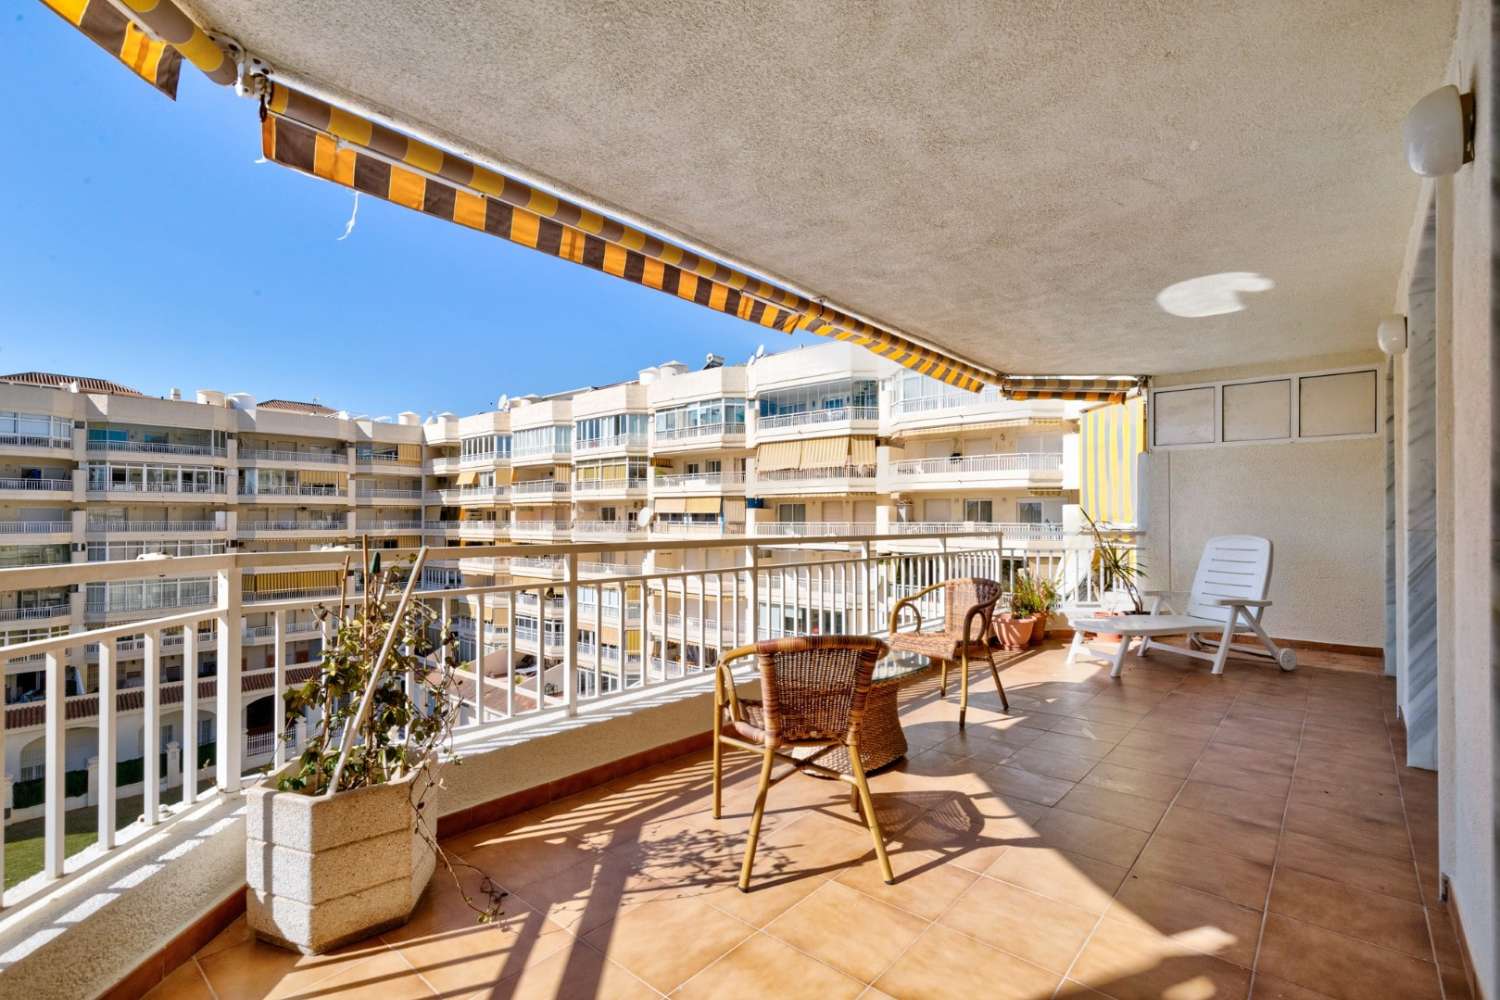 Apartment for sale only 300 meters from the beach in Los Boliches, Fuengirola